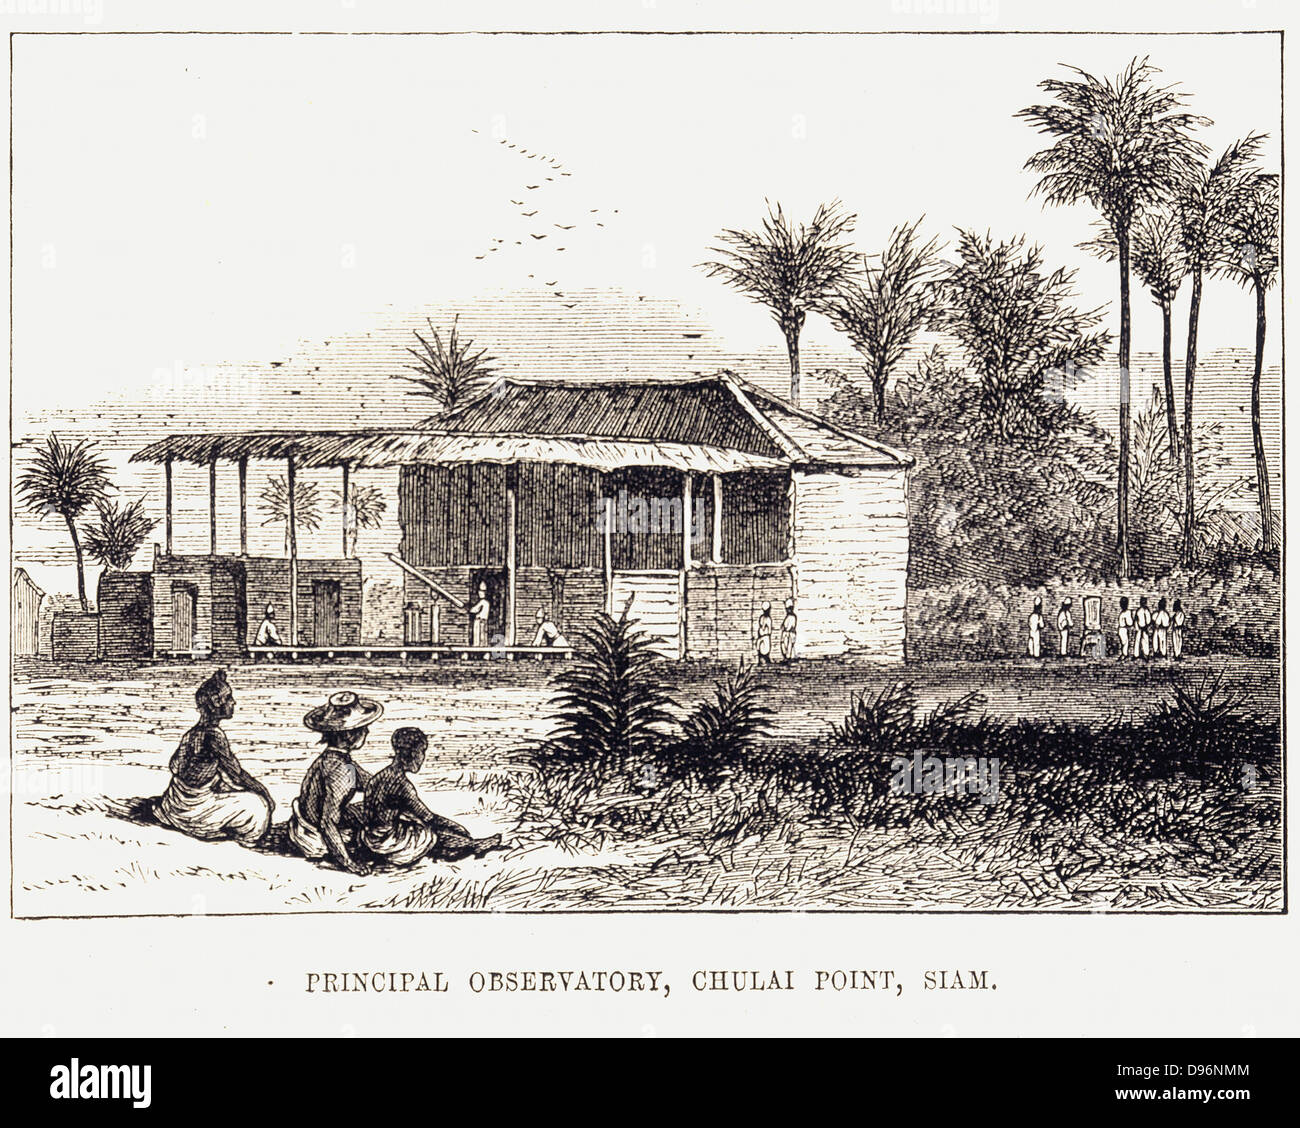 Principal Observatory, Siam. Illustrating the observatory at Chulai Point, in modern day Thailand, used to examine the Transit of Venus in November 1875. From  'The Illustrated London News ' Volume 66  (London, 19 June 1875). Stock Photo